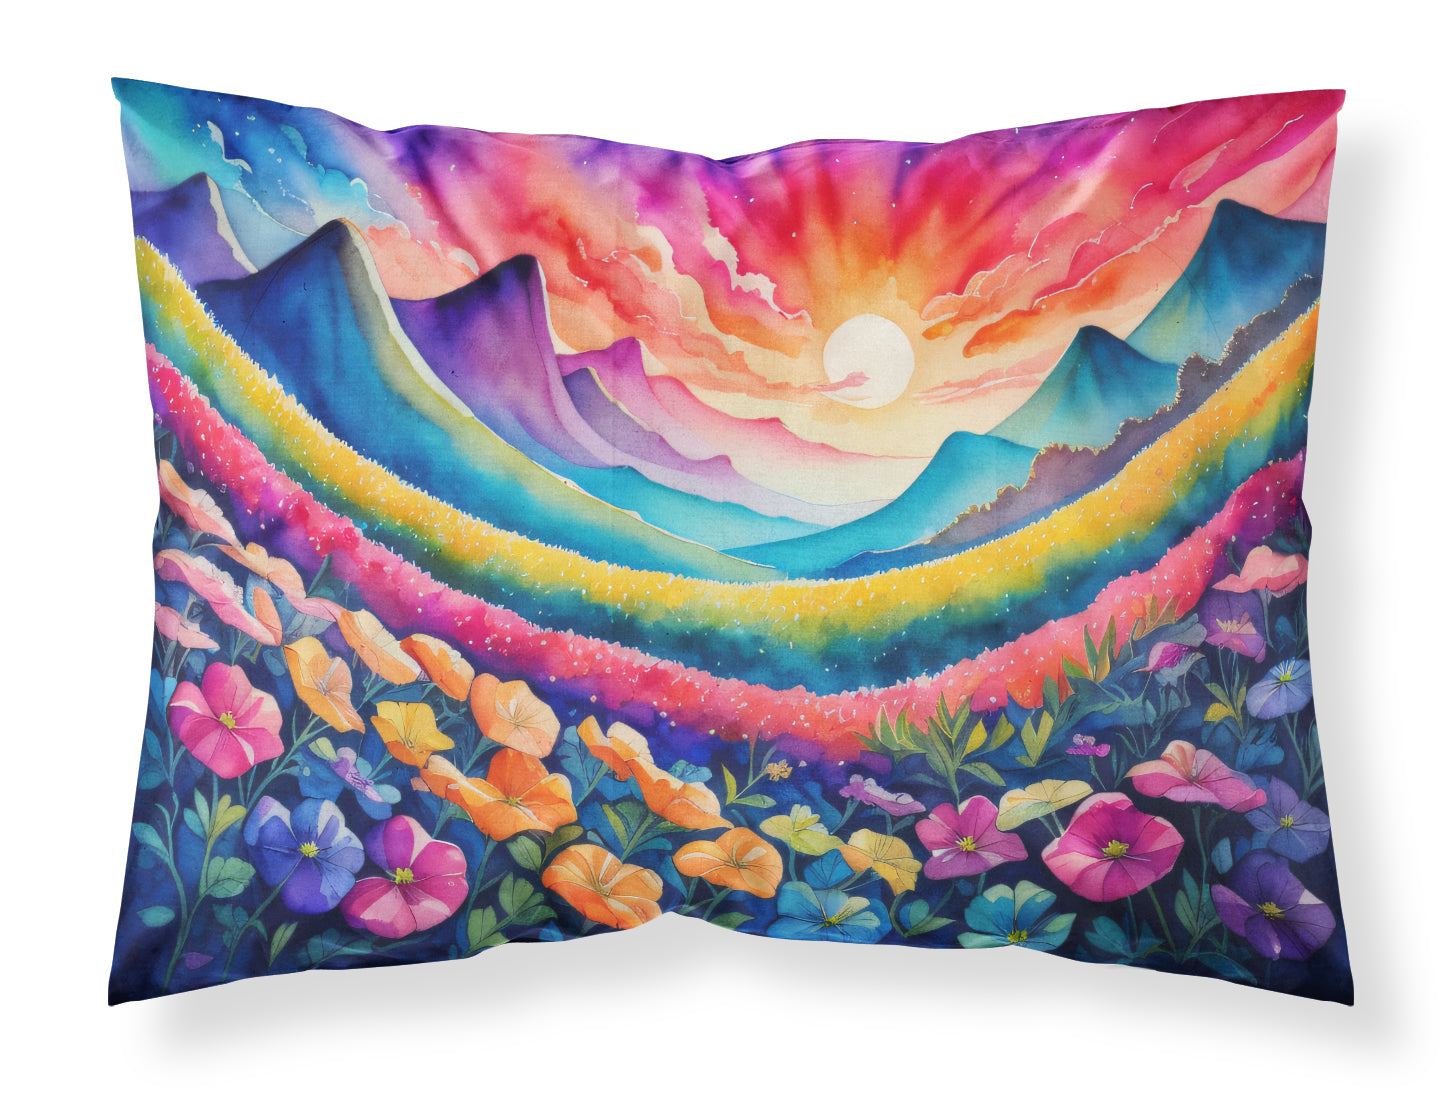 Buy this Petunias in Color Fabric Standard Pillowcase